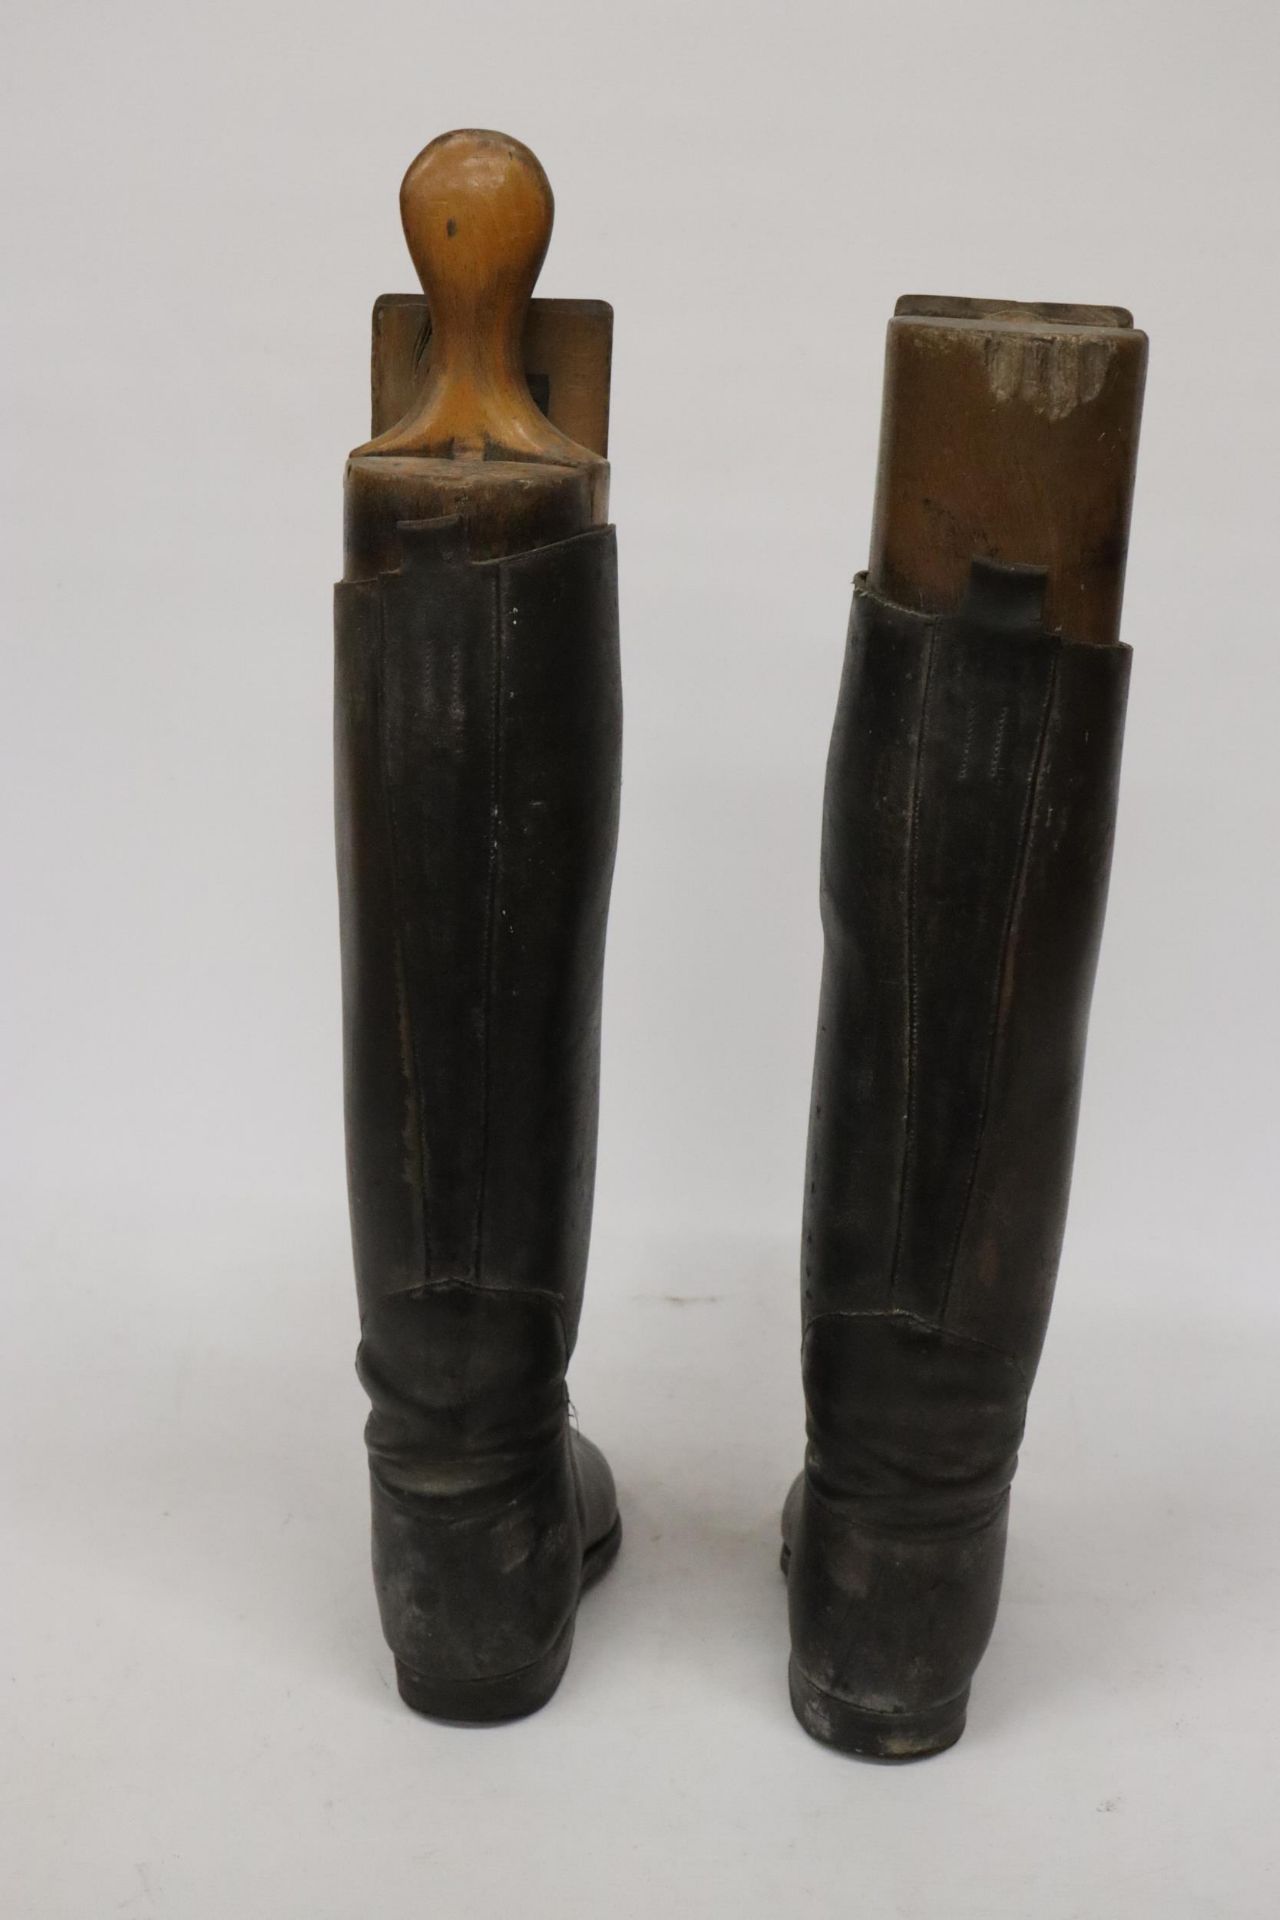 A PAIR OF VINTAGE LEATHER RIDING BOOTS WITH WOODEN BOOT TREES - Image 4 of 5